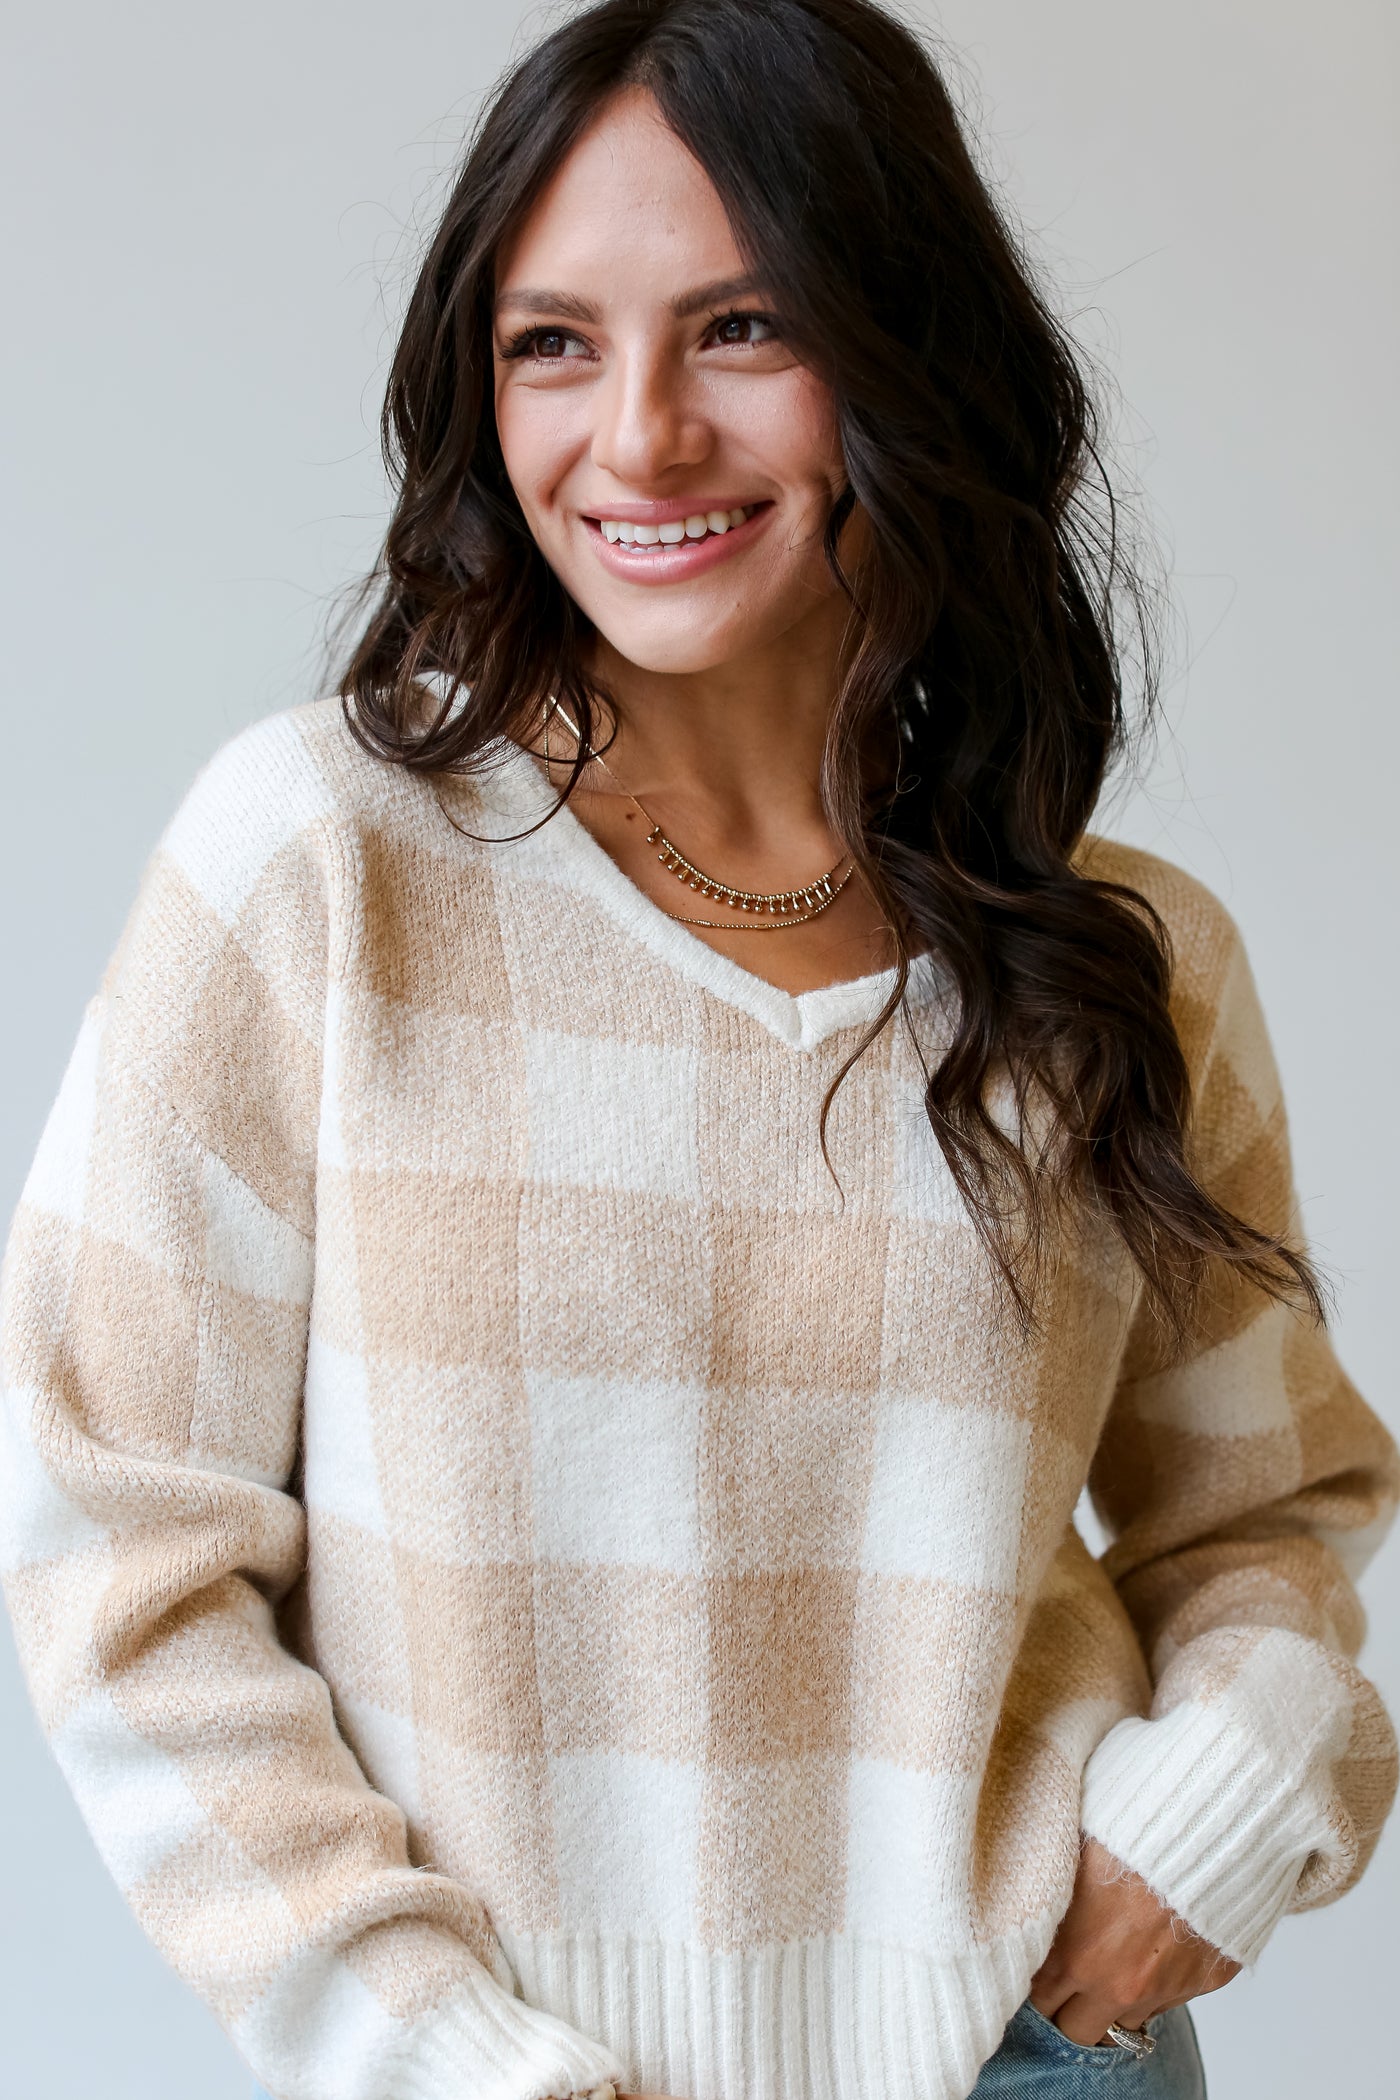 model wearing a Beige Checkered Sweater